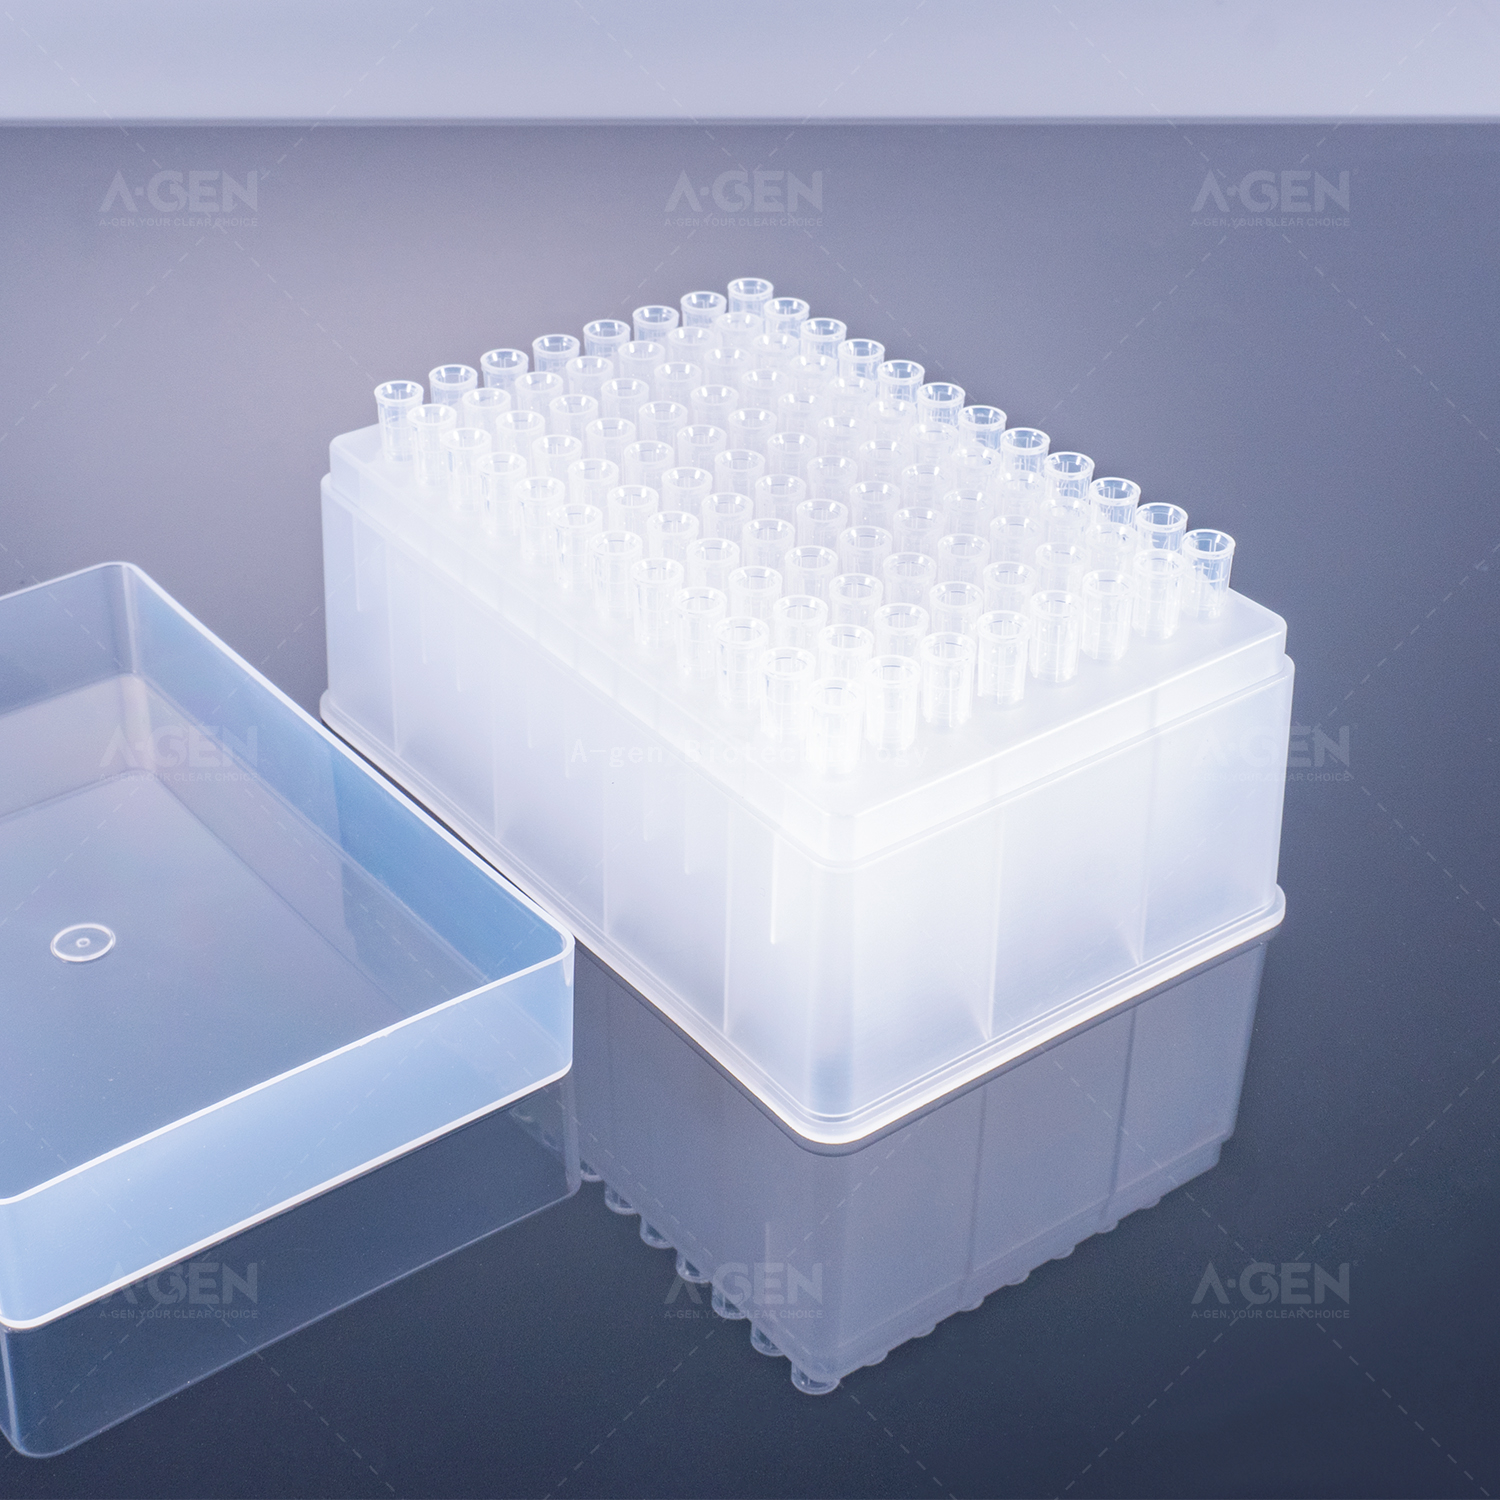 Nayo Tip 50μL Clear Robotic PP Pipette Tip (Racked,sterilized) for Liquid Transfer No Filter FX-50-RSL Low Residual